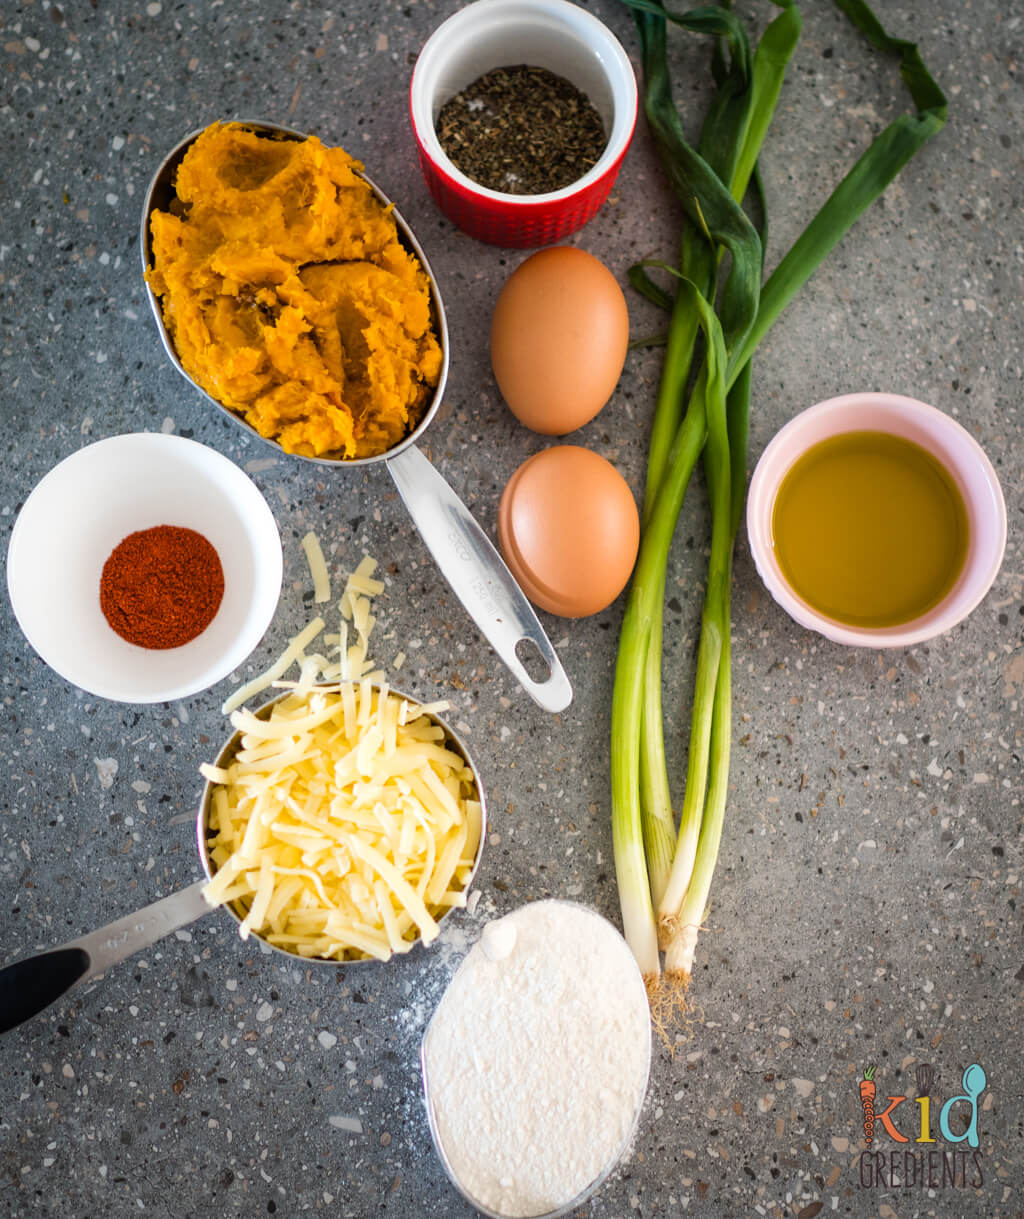 ingredients: pumpkin puree, eggs, paprika, olive oil, cheese, flour and spring onions